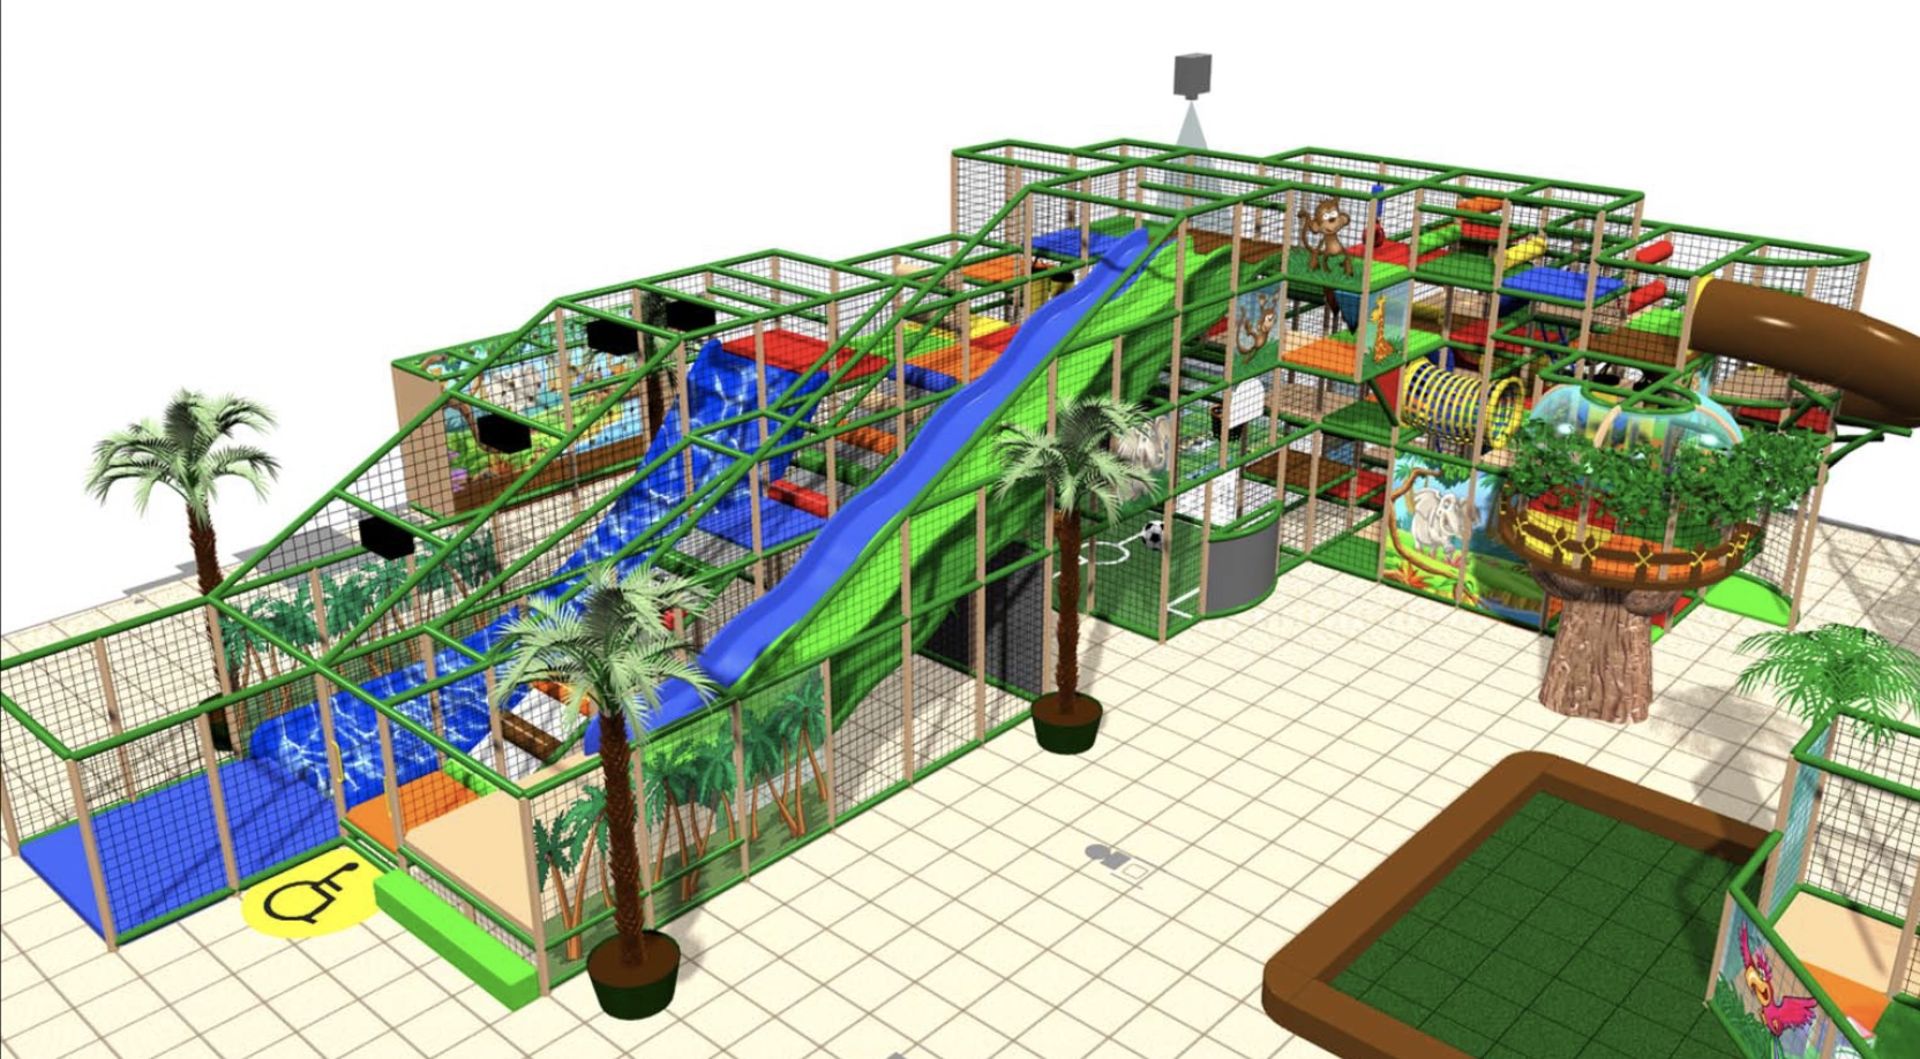 ONE INTERNATIONAL PLAY COMPANY LARGE INDOOR PLAYGROUND W/20FT HIGH SLIDES W/THREE WAVE SLIDE - Image 2 of 13